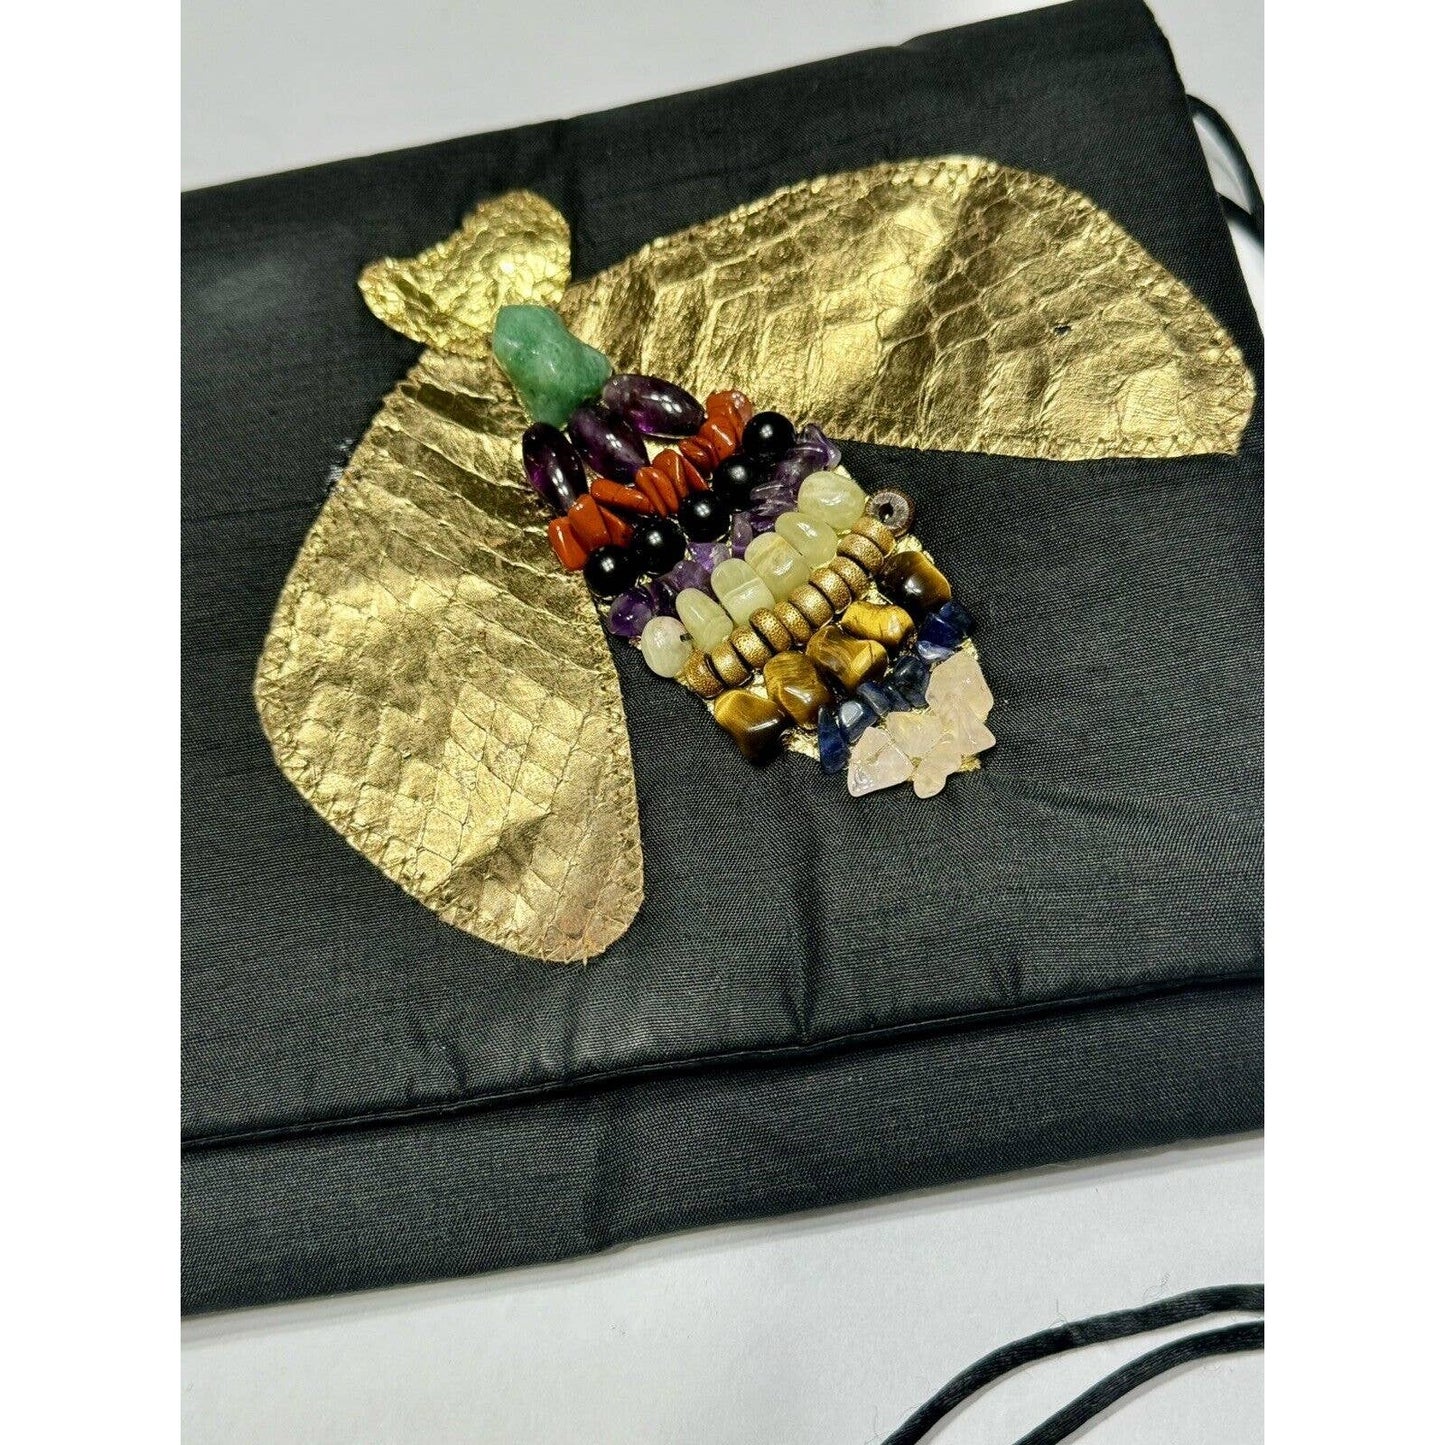 Opulant ContainersVintage Opulent Containers Bee Pouch With Semi Precious Stones Handbag Crossbody - Black Dog Vintage